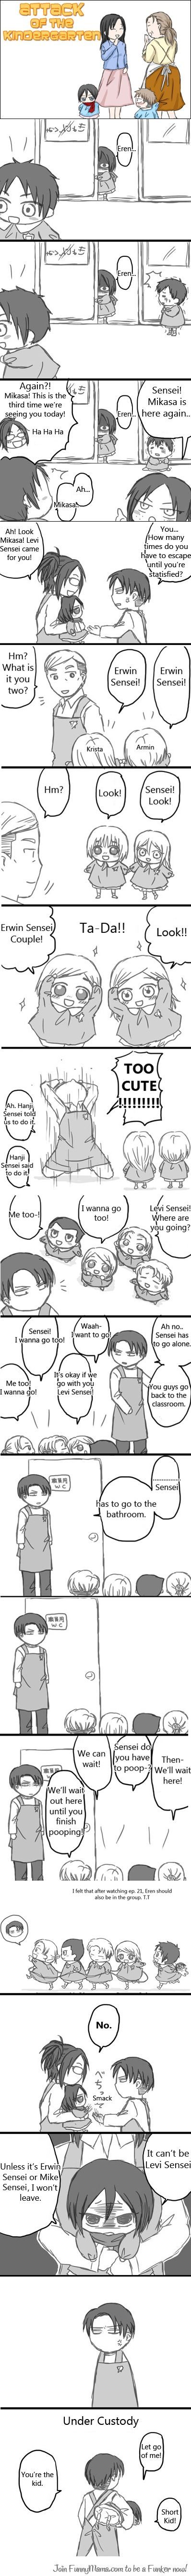 Attack on Titan ~~ So. Much. AWESOMENESS!! :: [ Attack on Kindergarten ]